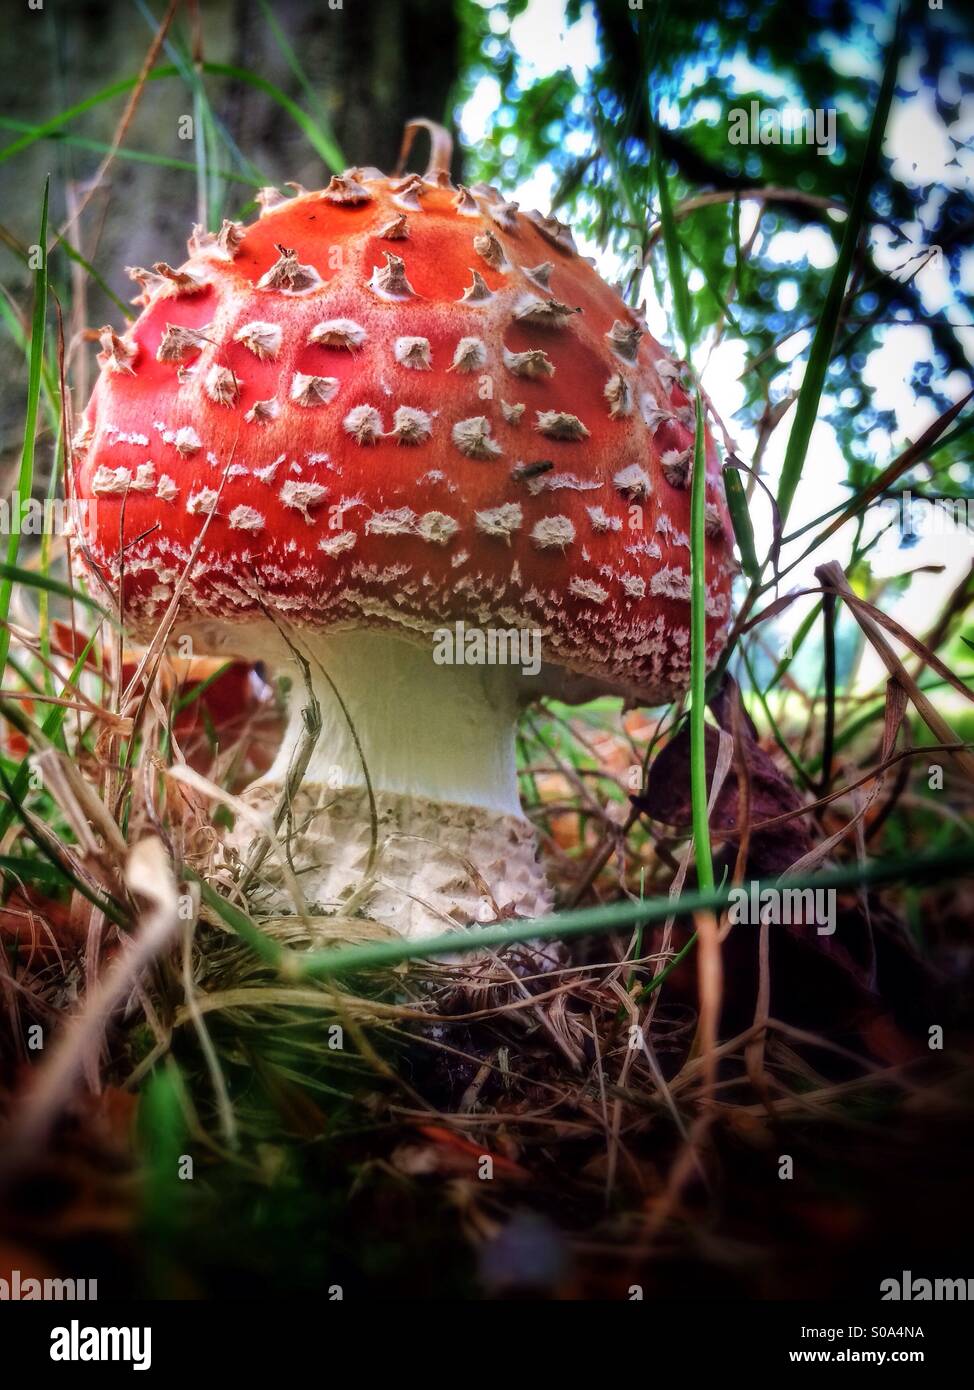 Amanita Muscaria, or Fly Agaric mushroom growing wild in a grassy field. With its red cap and white spots, this hallucinogenic mushroom is seen as the quintessential toadstool from fairy stories. Stock Photo